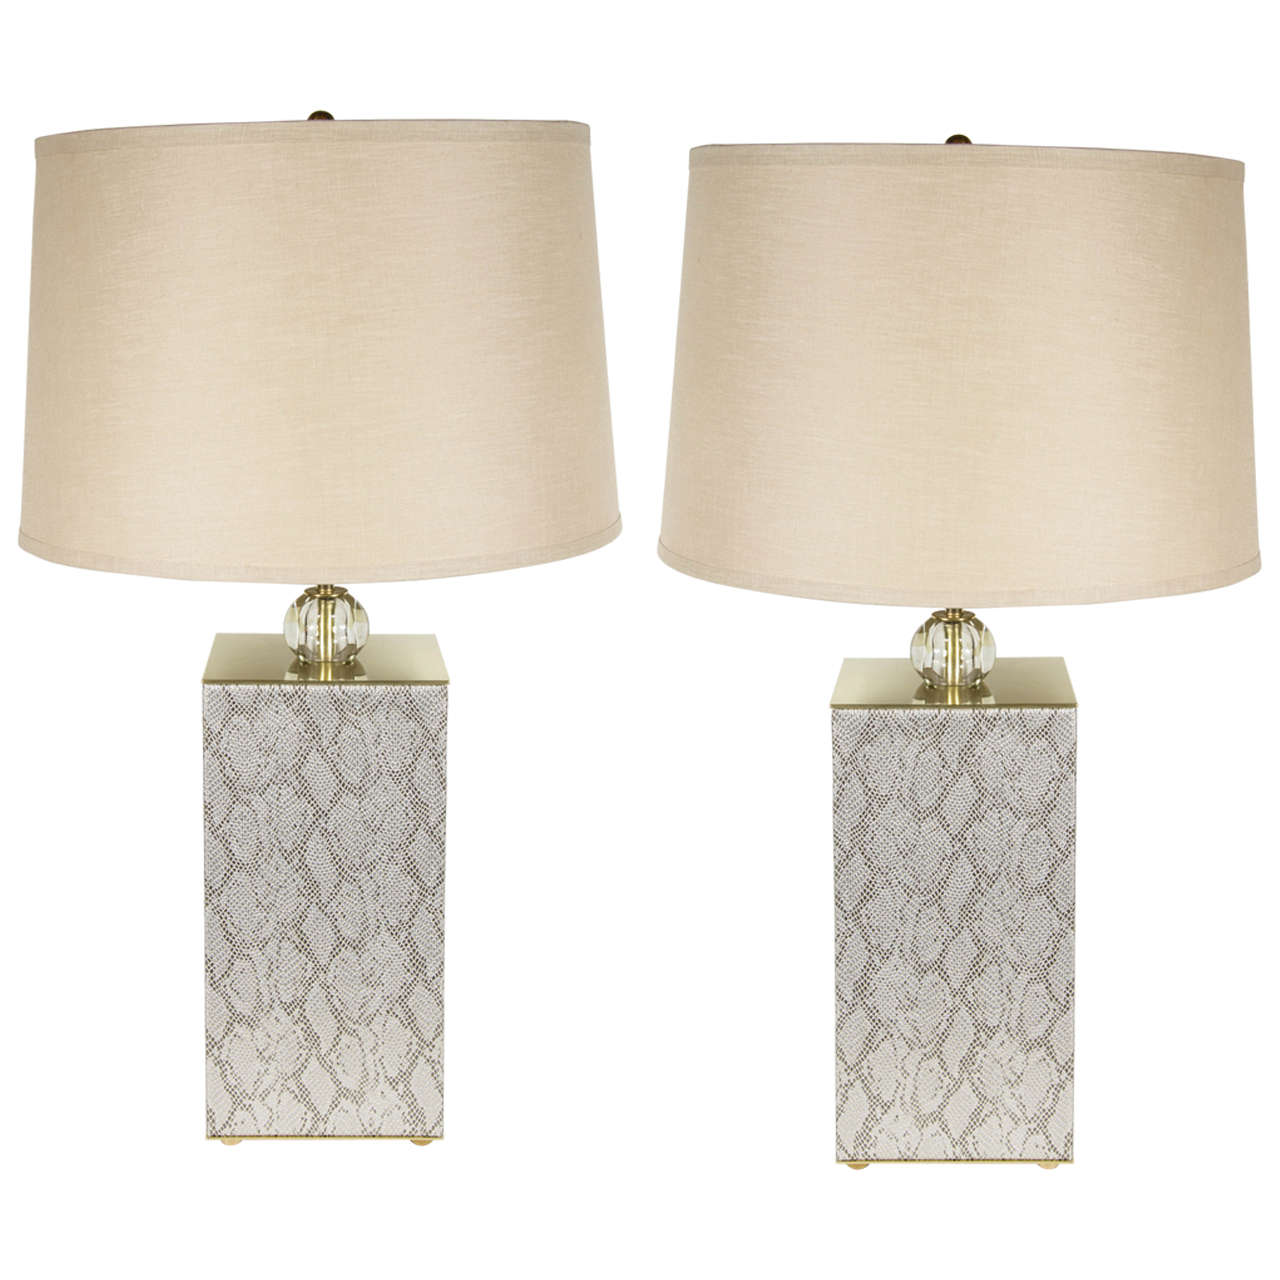 Pair of Ultra Chic Mid-Century Modernist Table Lamps in Faux Python and Brass